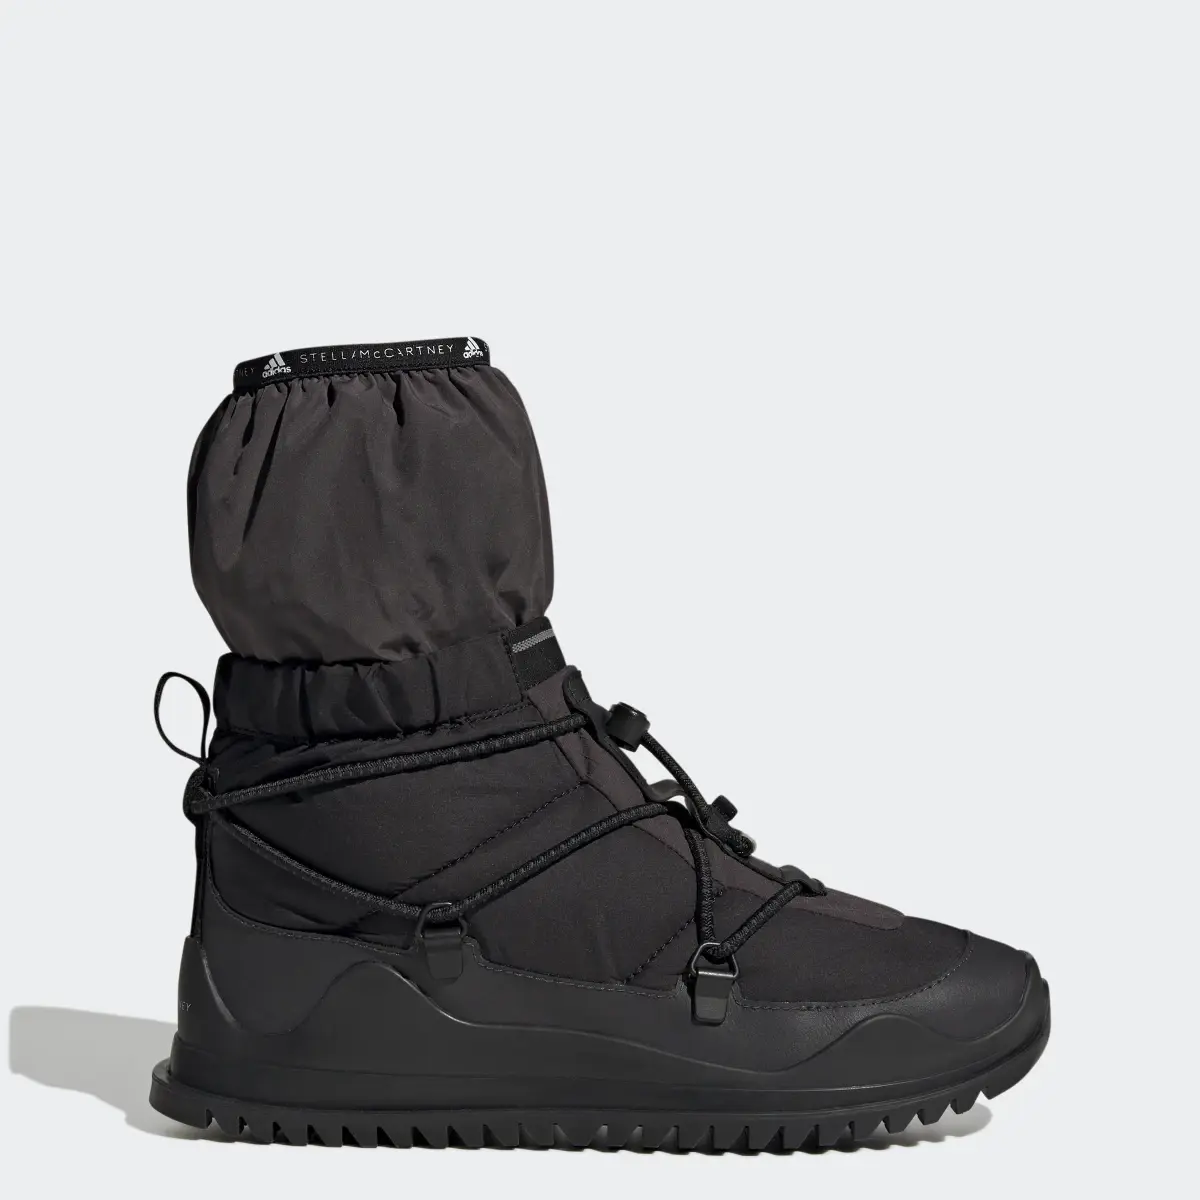 Adidas by Stella McCartney COLD.RDY Winter Boots. 1